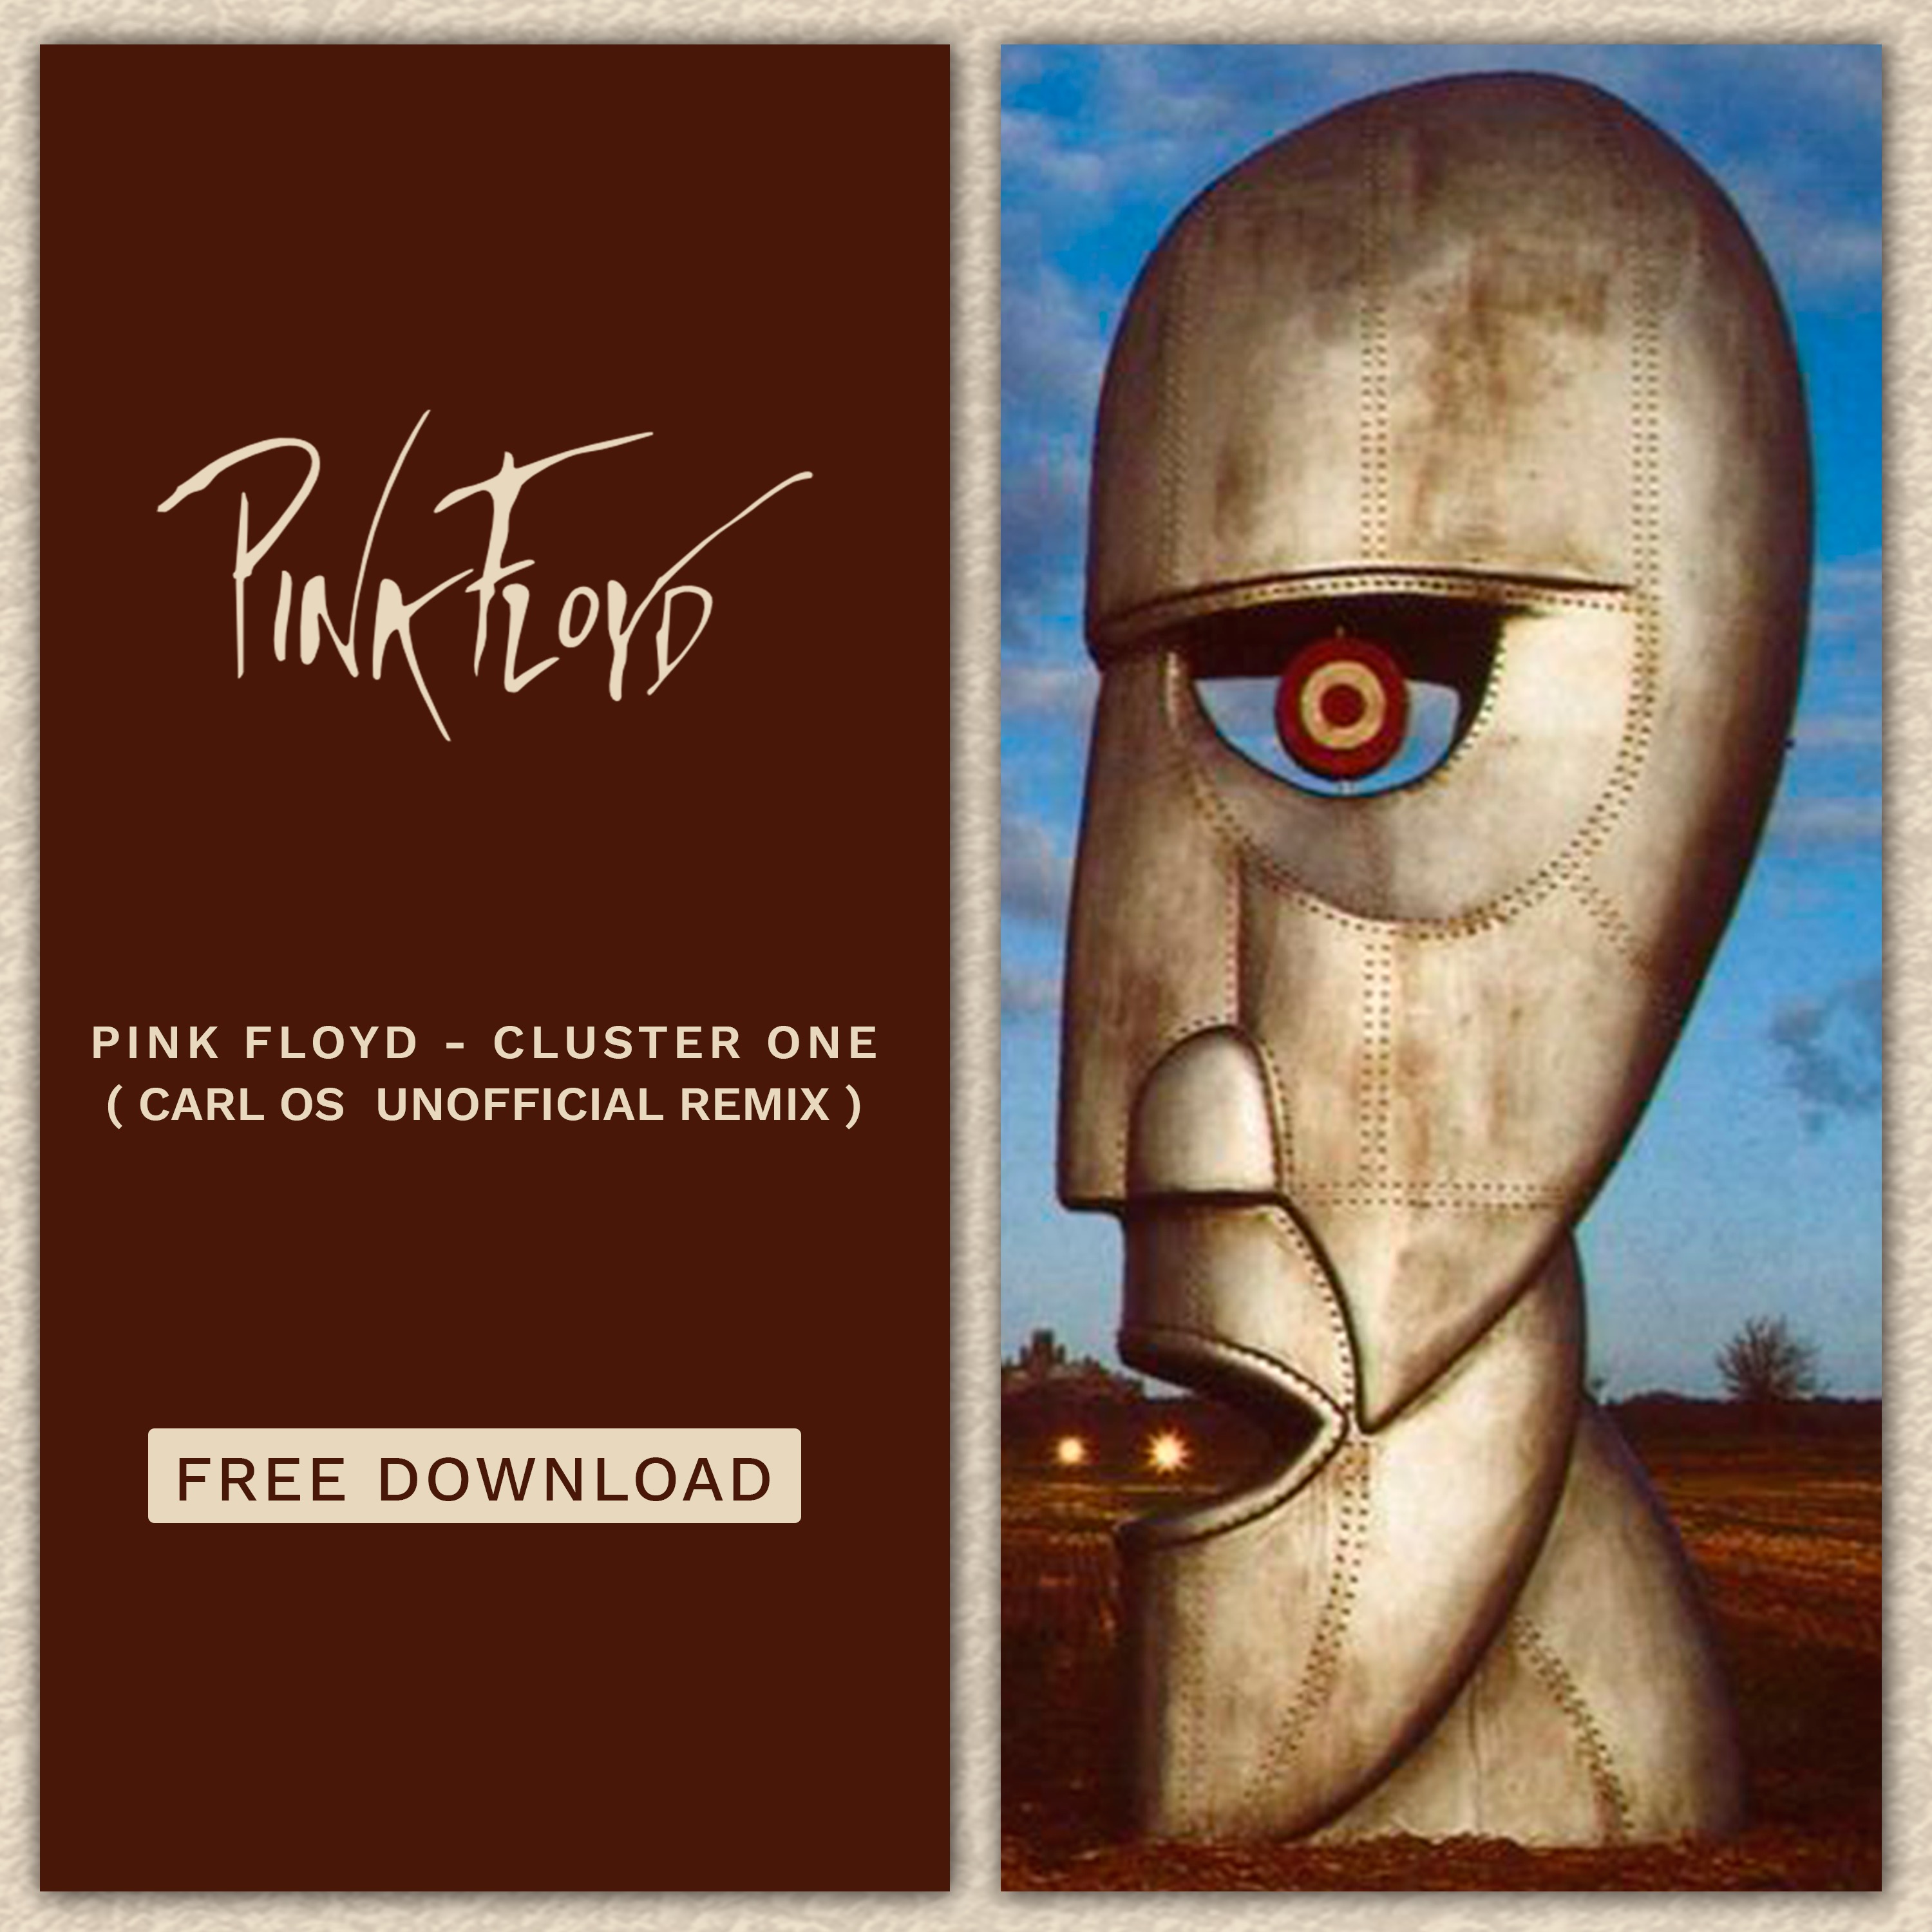 Download FREE DOWNLOAD: Pink Floyd - Cluster One (Carl OS Unofficial Remix)